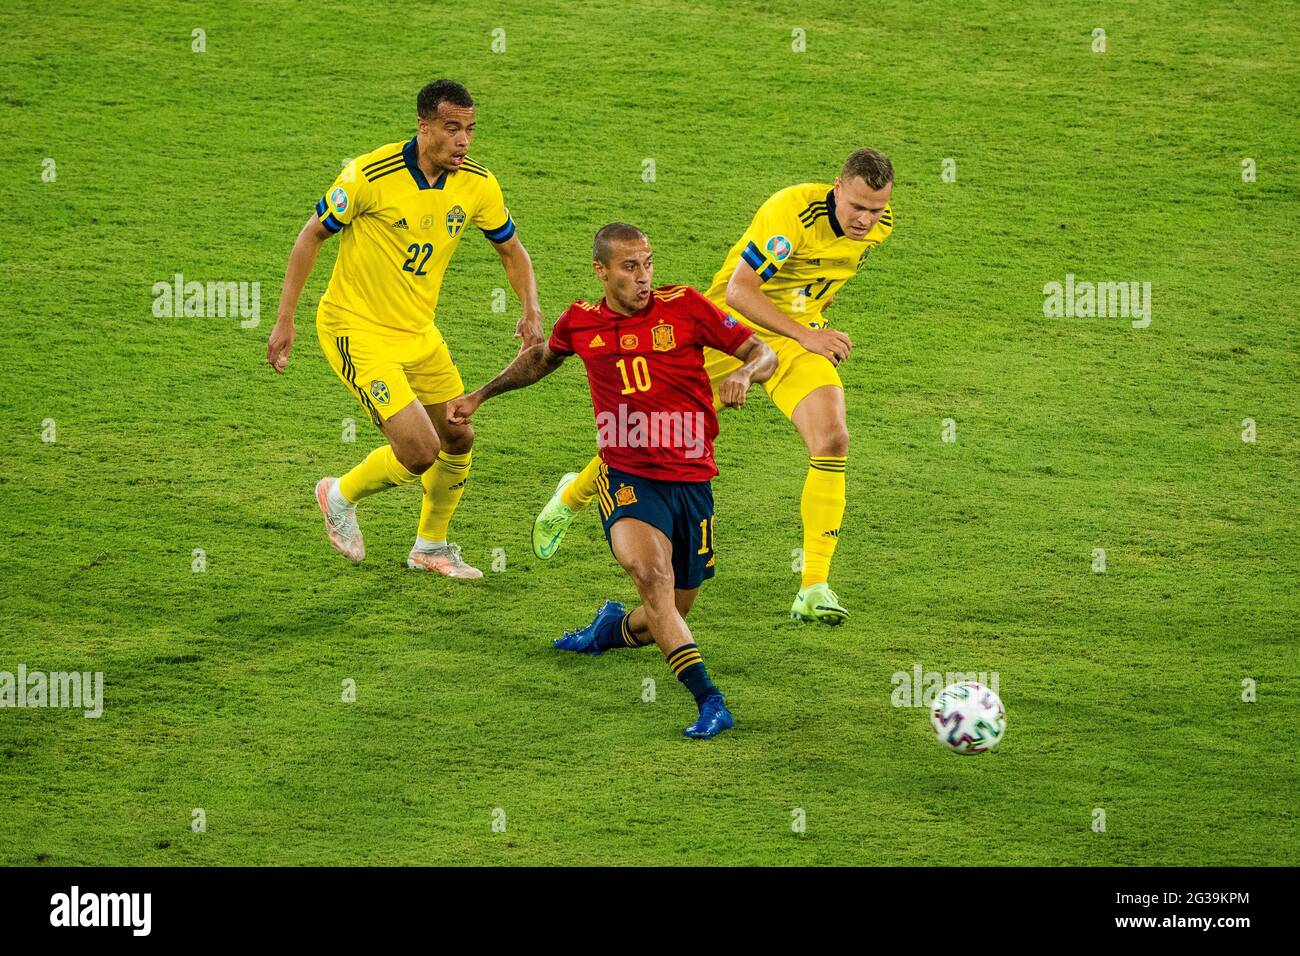 Seville, Spain. 14th June, 2021. Thiago Alcantara (C) of Spain vies with Robin Quaison (L) and Viktor Claesson of Sweden during the UEFA Euro 2020 Championship Group E match in Seville, Spain, June 14, 2021. Credit: Joan Gosa/Xinhua/Alamy Live News Stock Photo